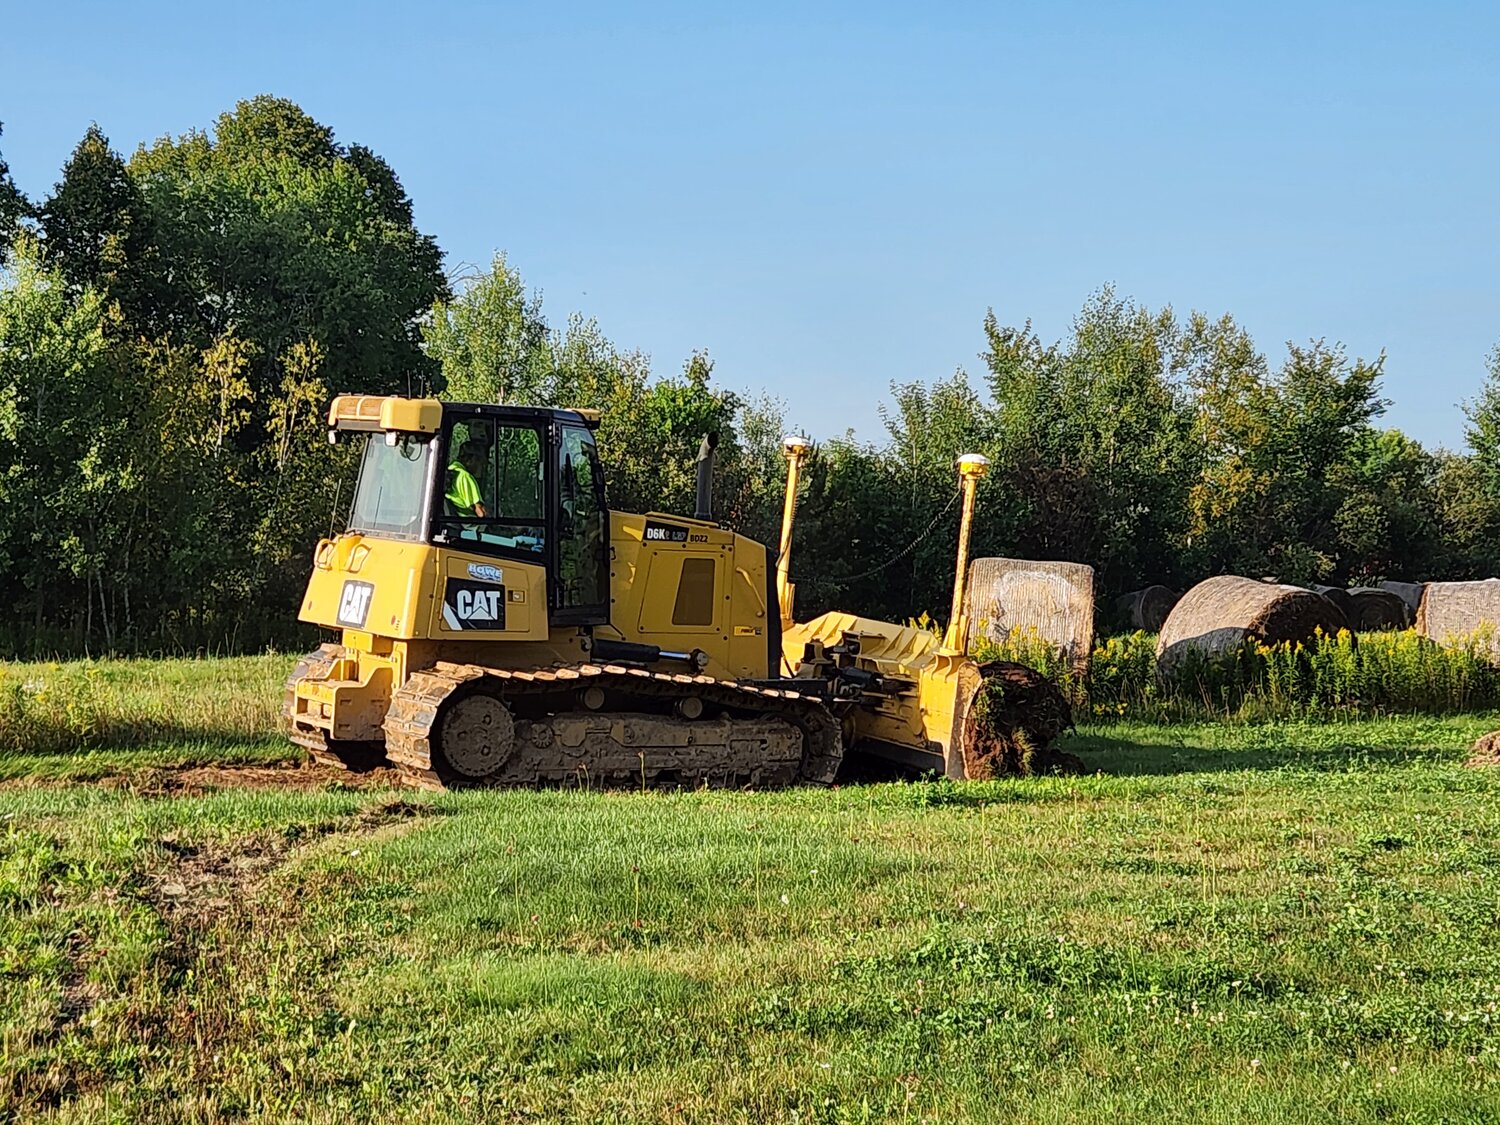 On August 28th,  Bowe Trucking and Excavating crews broke ground on the new Helipad in Holcombe located on the property of Thomas and Anna Rocque of Rocque Ridge Guides and Outfitters.